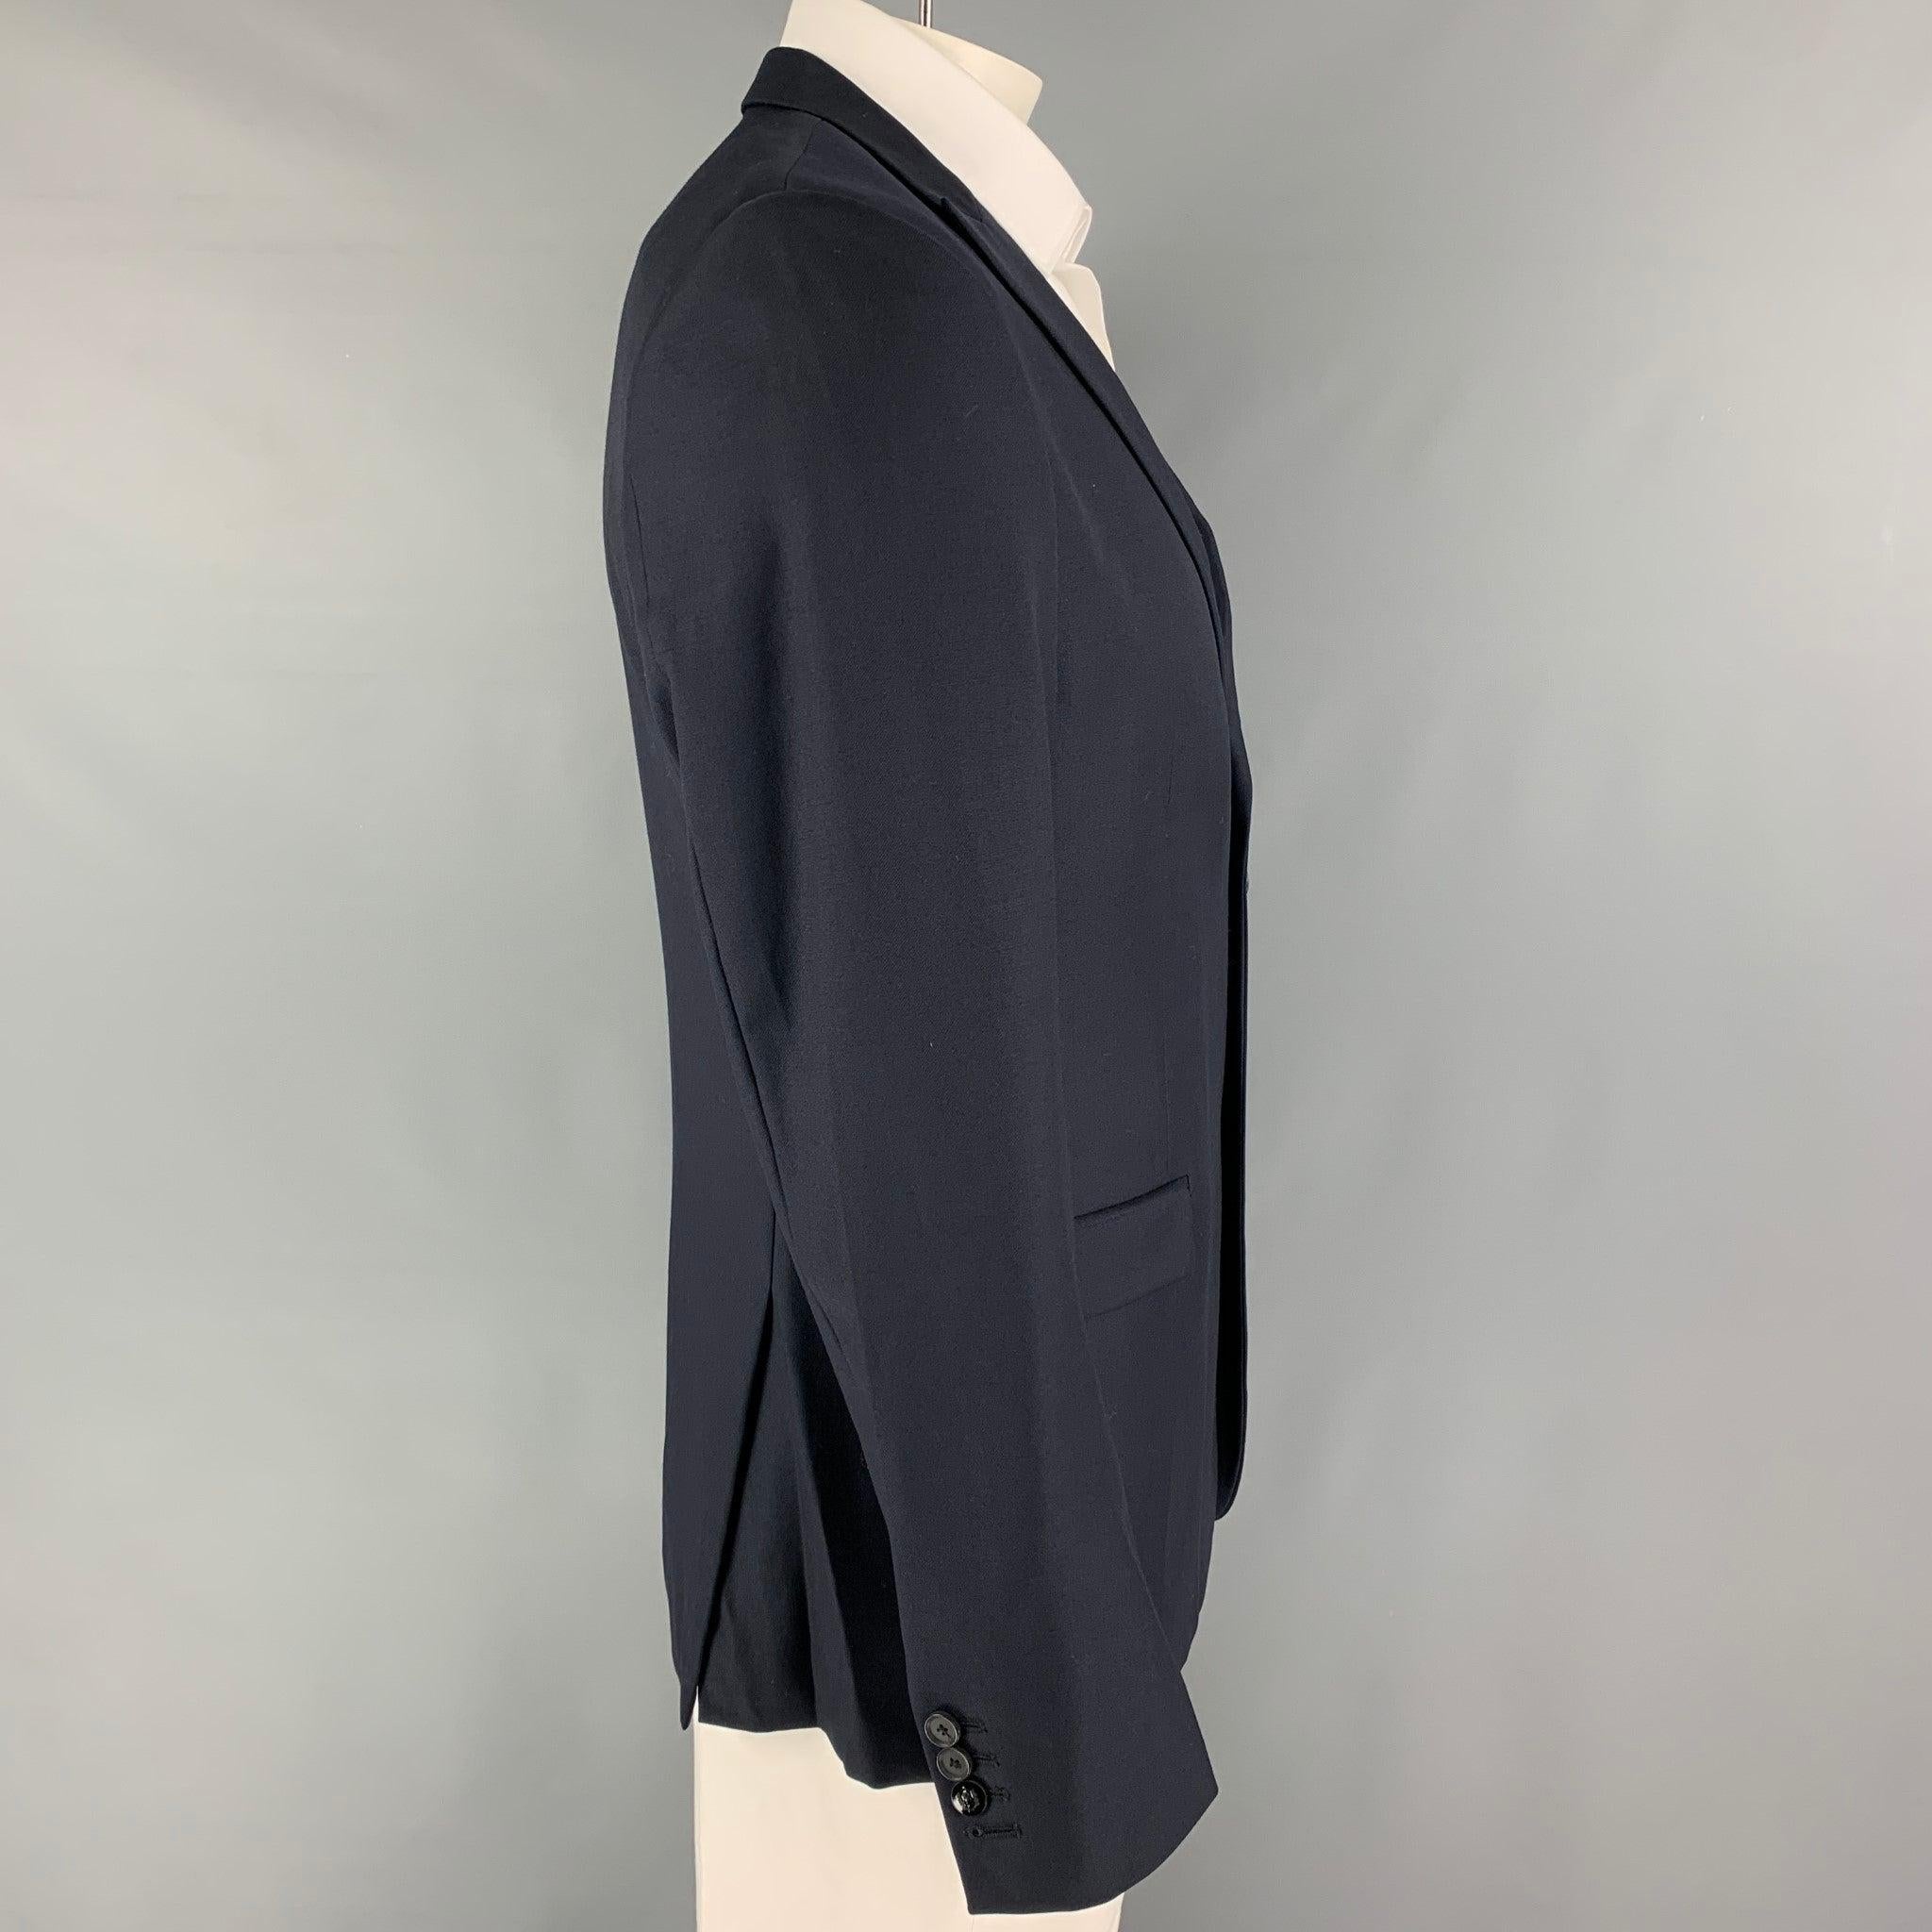 THE KOOPLES sport coat comes in a navy wool with a full liner featuring a peak lapel, flap pockets, double back vent, and a double button closure. Excellent
Pre-Owned Condition. 

Marked:   52 

Measurements: 
 
Shoulder: 18.5 inches Chest: 42